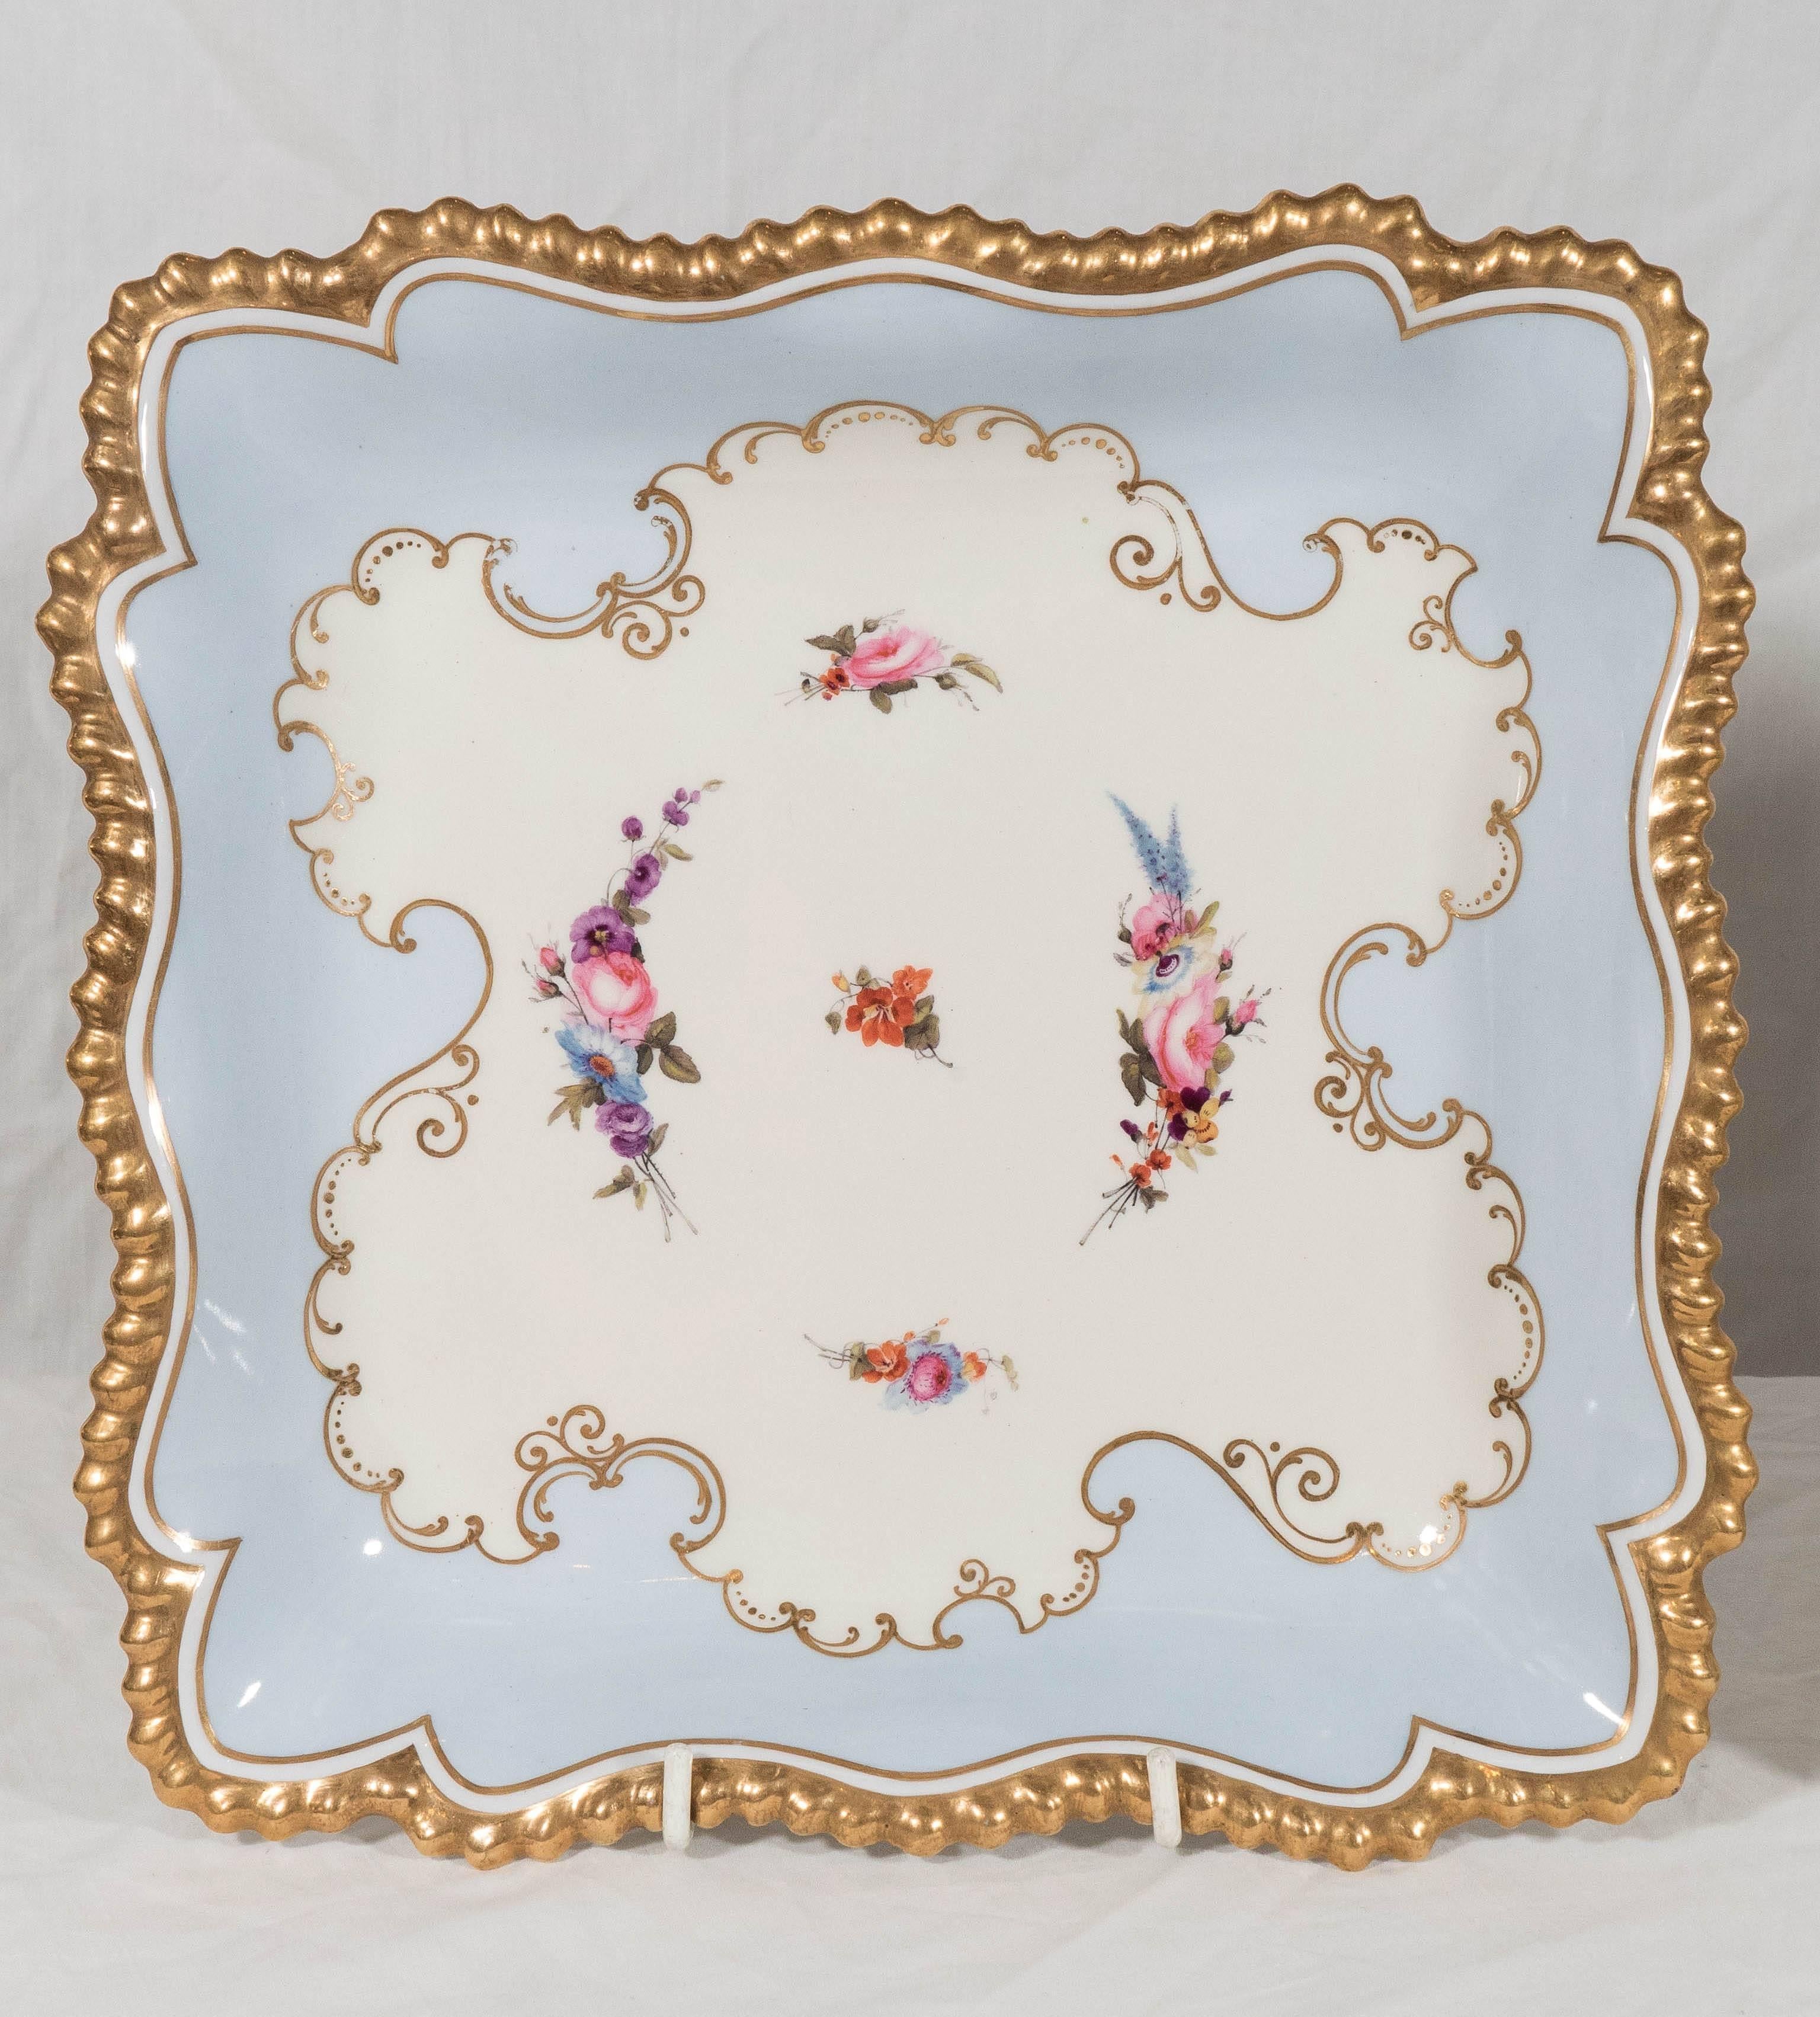 We are pleased to offer this pair of early 19th century pale blue Flight Barr Worcester square-shaped dishes with glided, gadrooned edges. In the center of each dish are hand-painted sprays of beautifully painted pink and purple flowers on a white